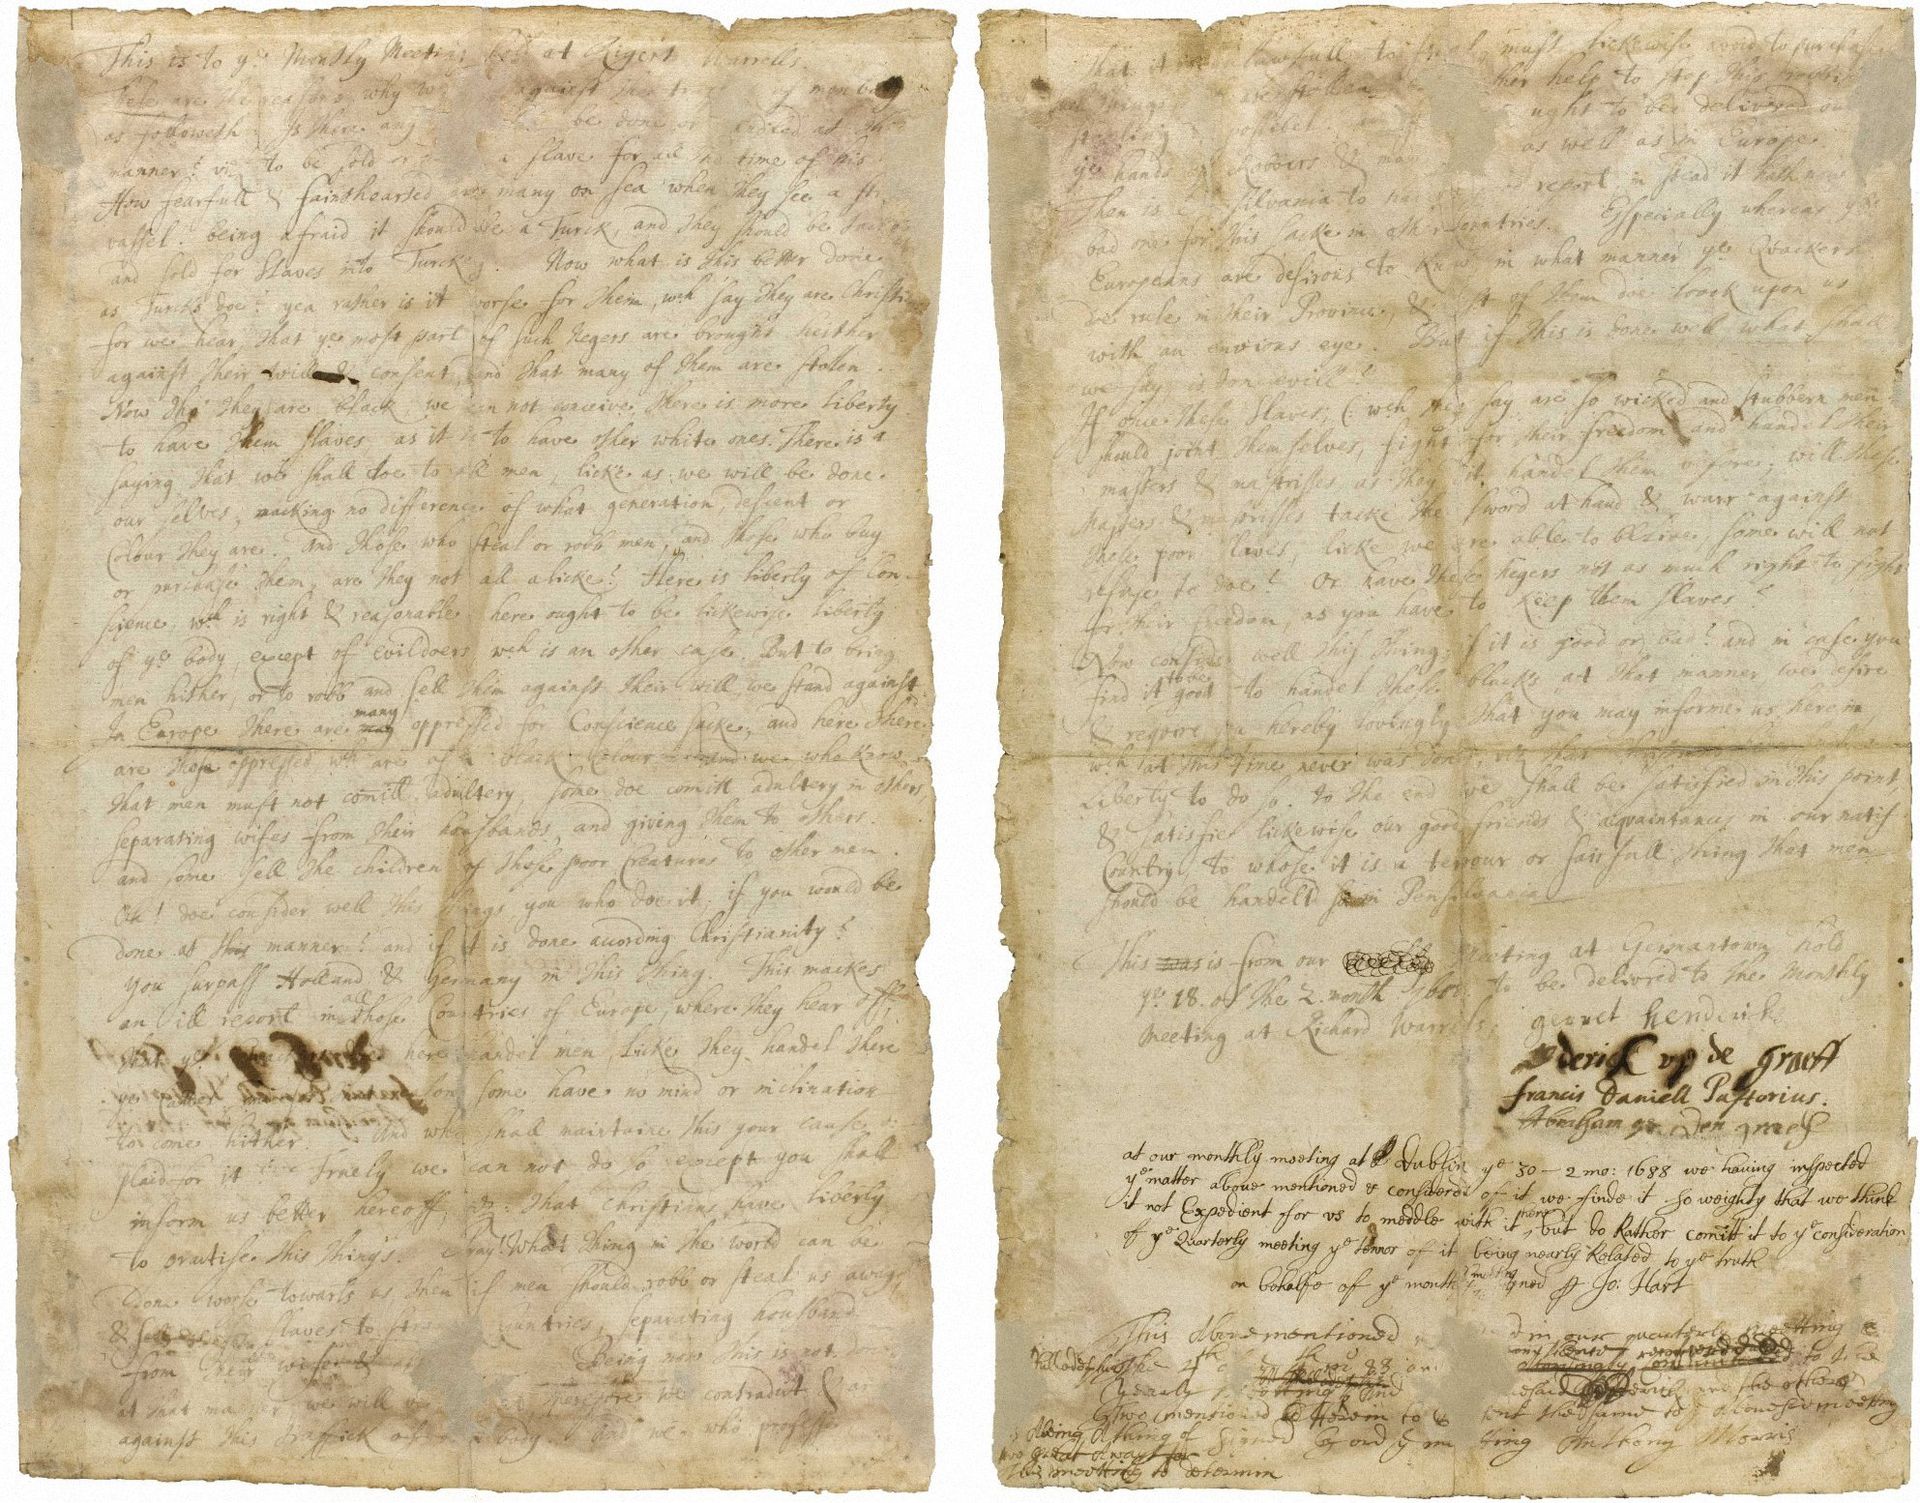 The 1688 Germantown Petition Against Slavery (Haverford College)